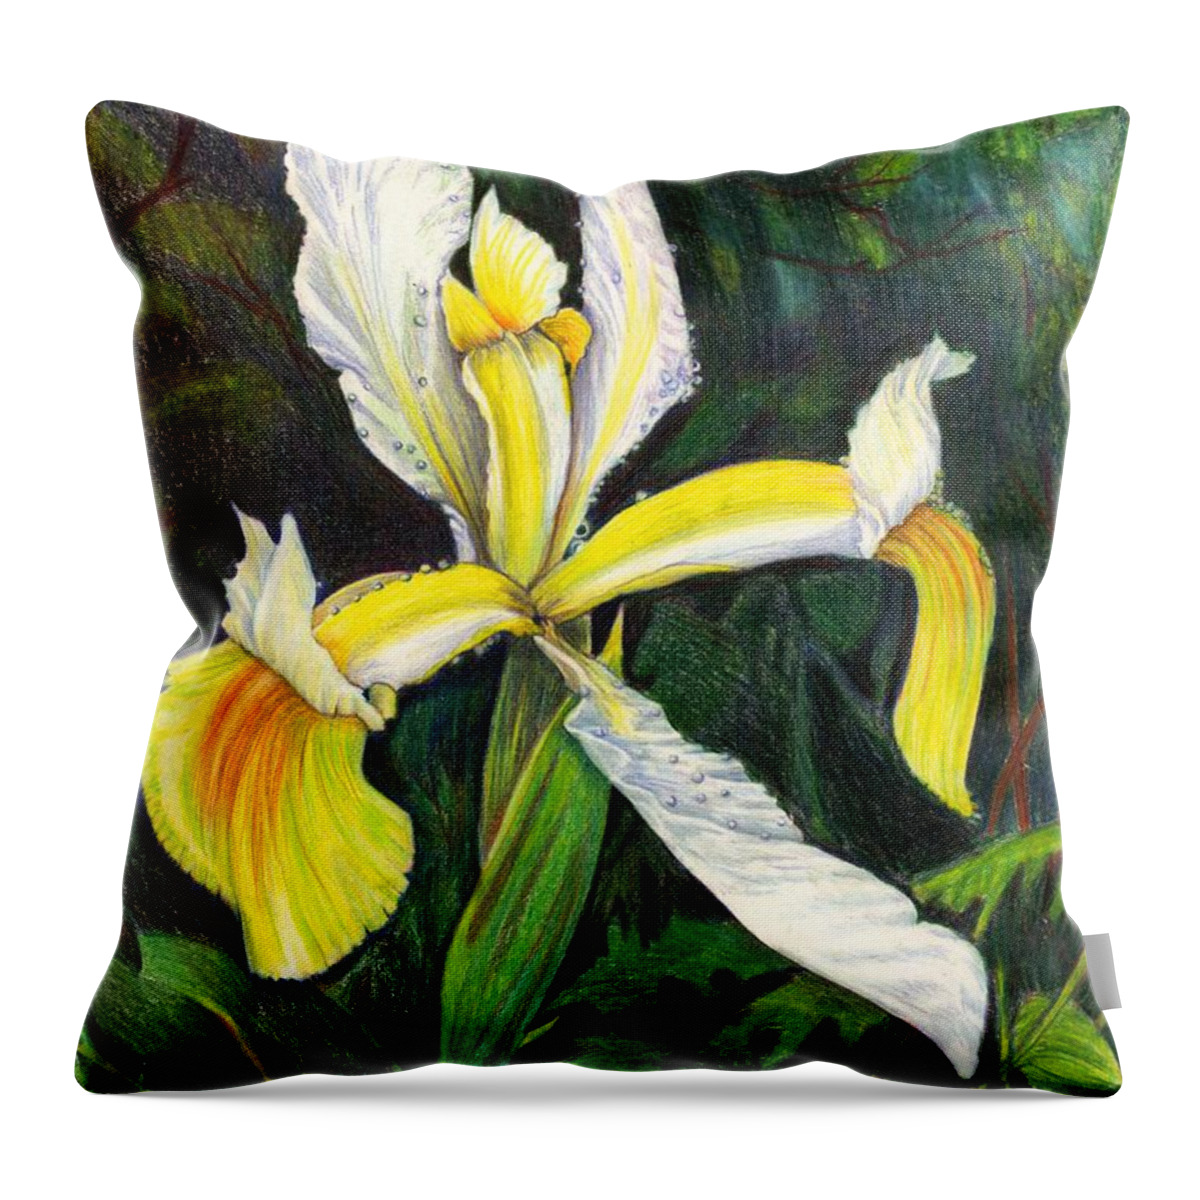 Yellow Iris Throw Pillow featuring the drawing I Rise To Thee by Nancy Cupp